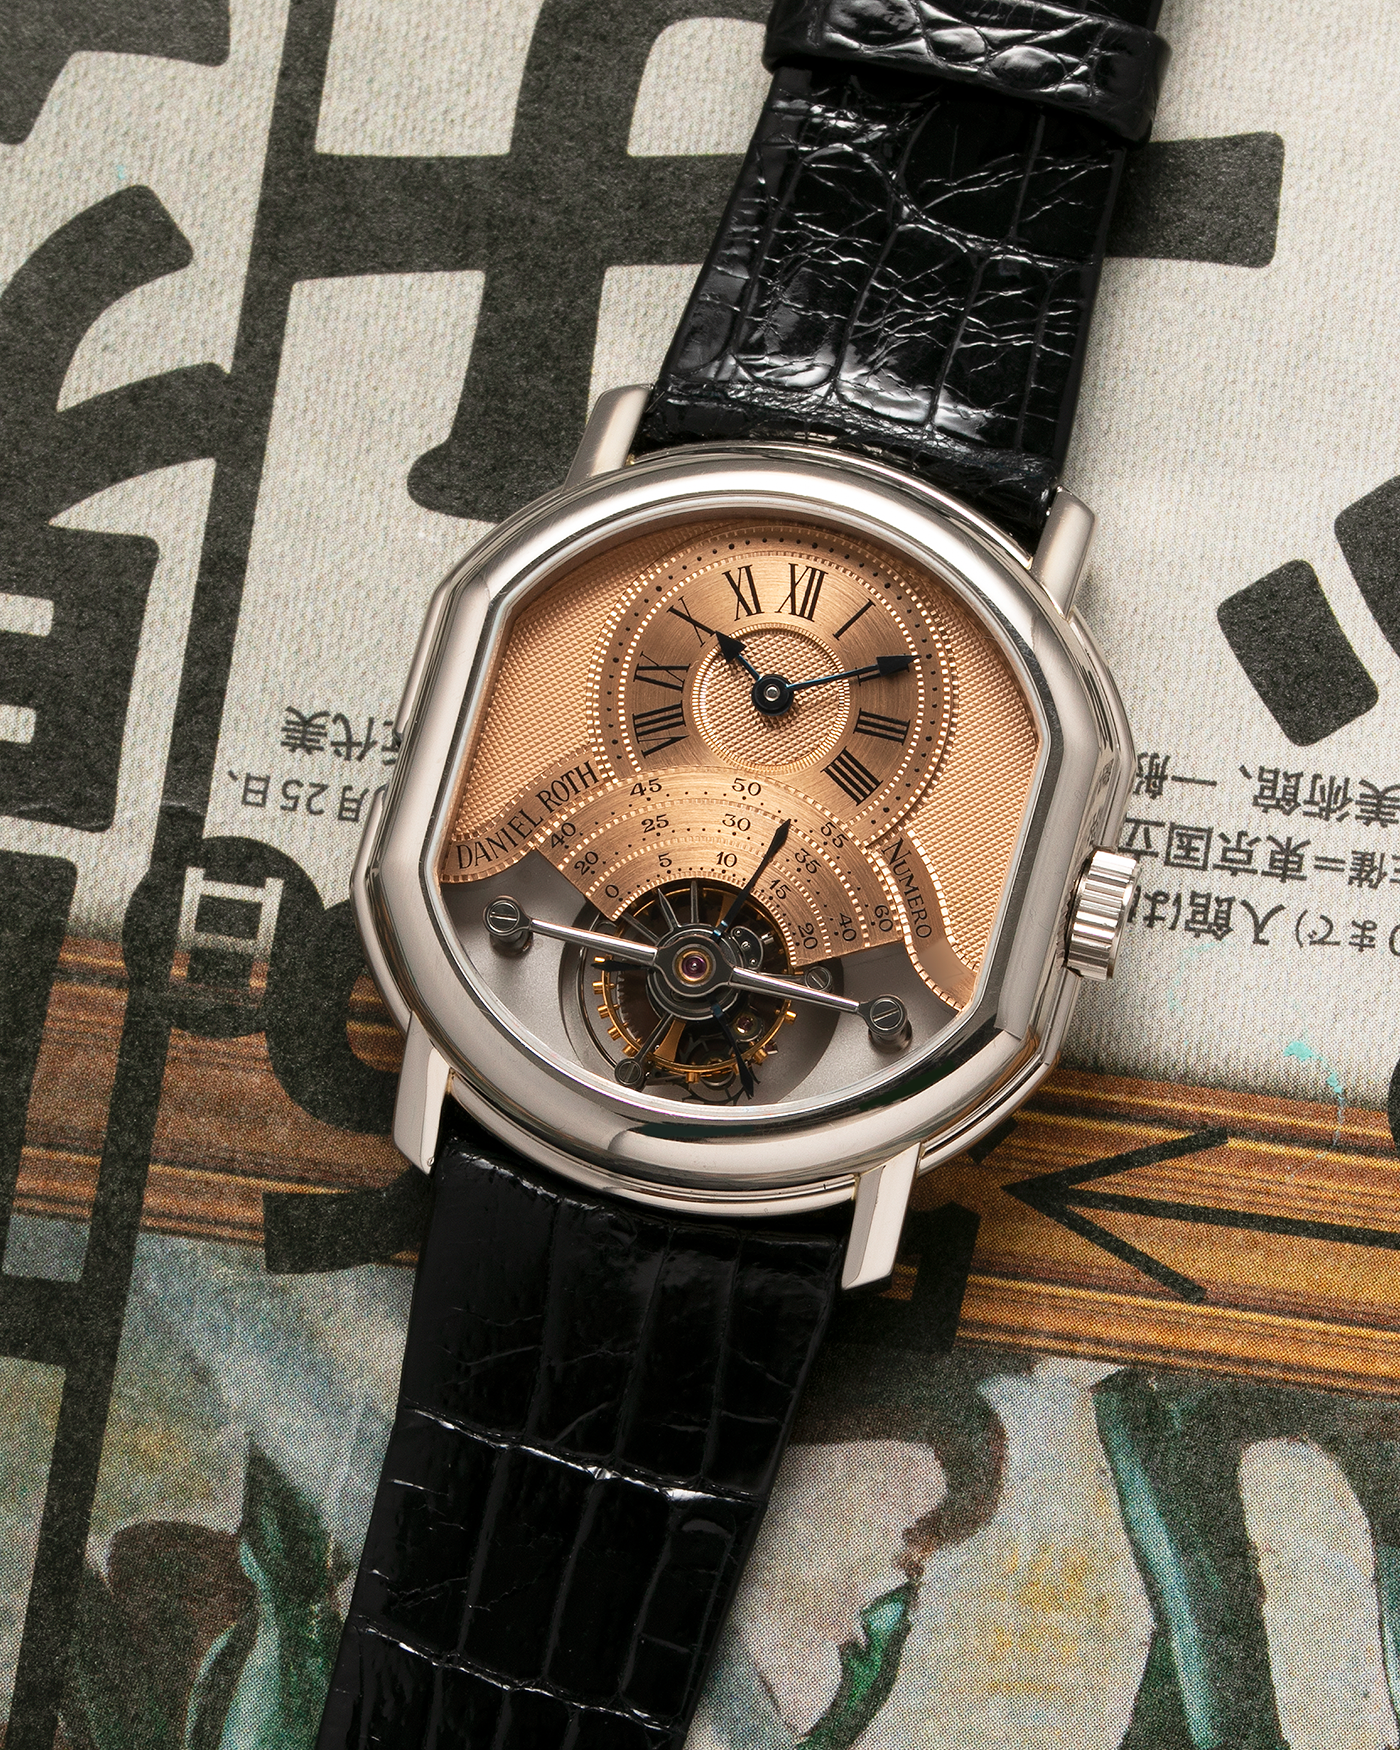 Brand: Daniel Roth Year: 1990’s Model: 2187 Tourbillon (Possibly Piece Unique) Material: 18-Carat White Gold  Movement: Cal. DR 307 One-Minute Tourbillon Regulator, Manual-Winding  Case Diameter: 35mm x 38mm Strap: Daniel Roth Black Alligator Leather with Signed 180carat White Gold Tang Buckle